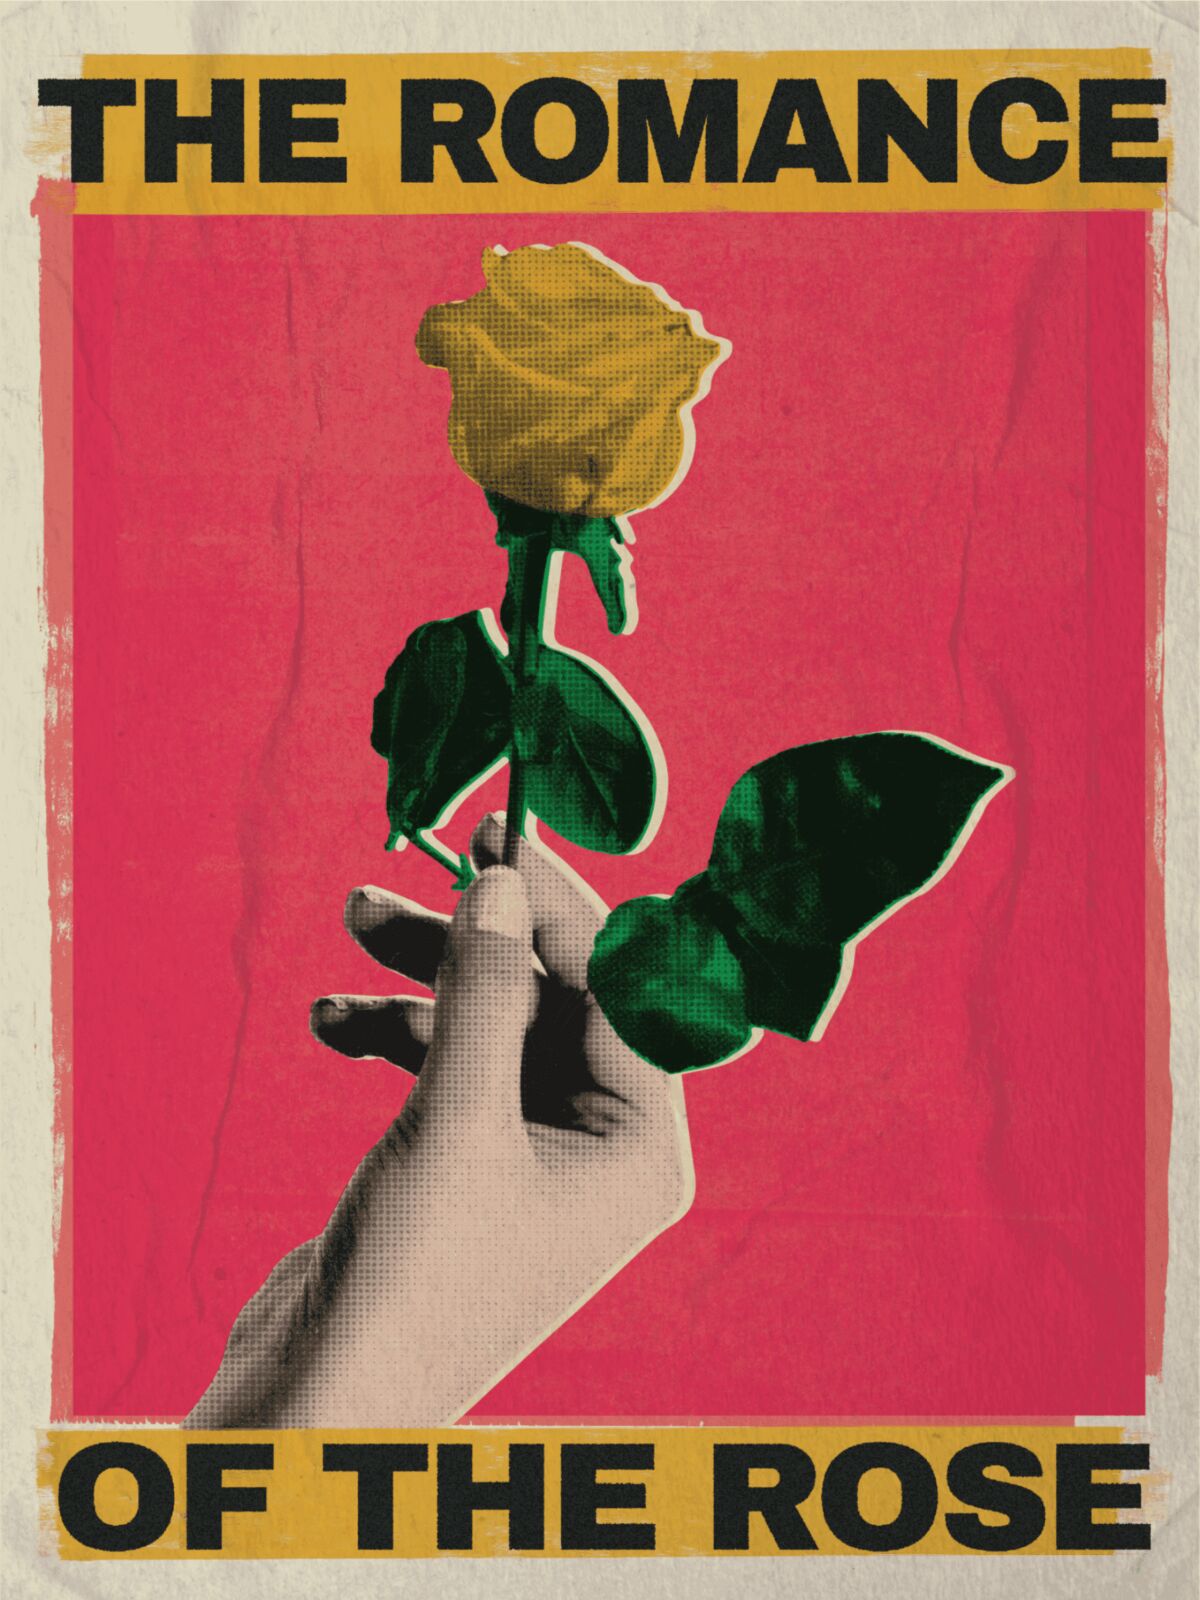 A poster of a hand holding a rose